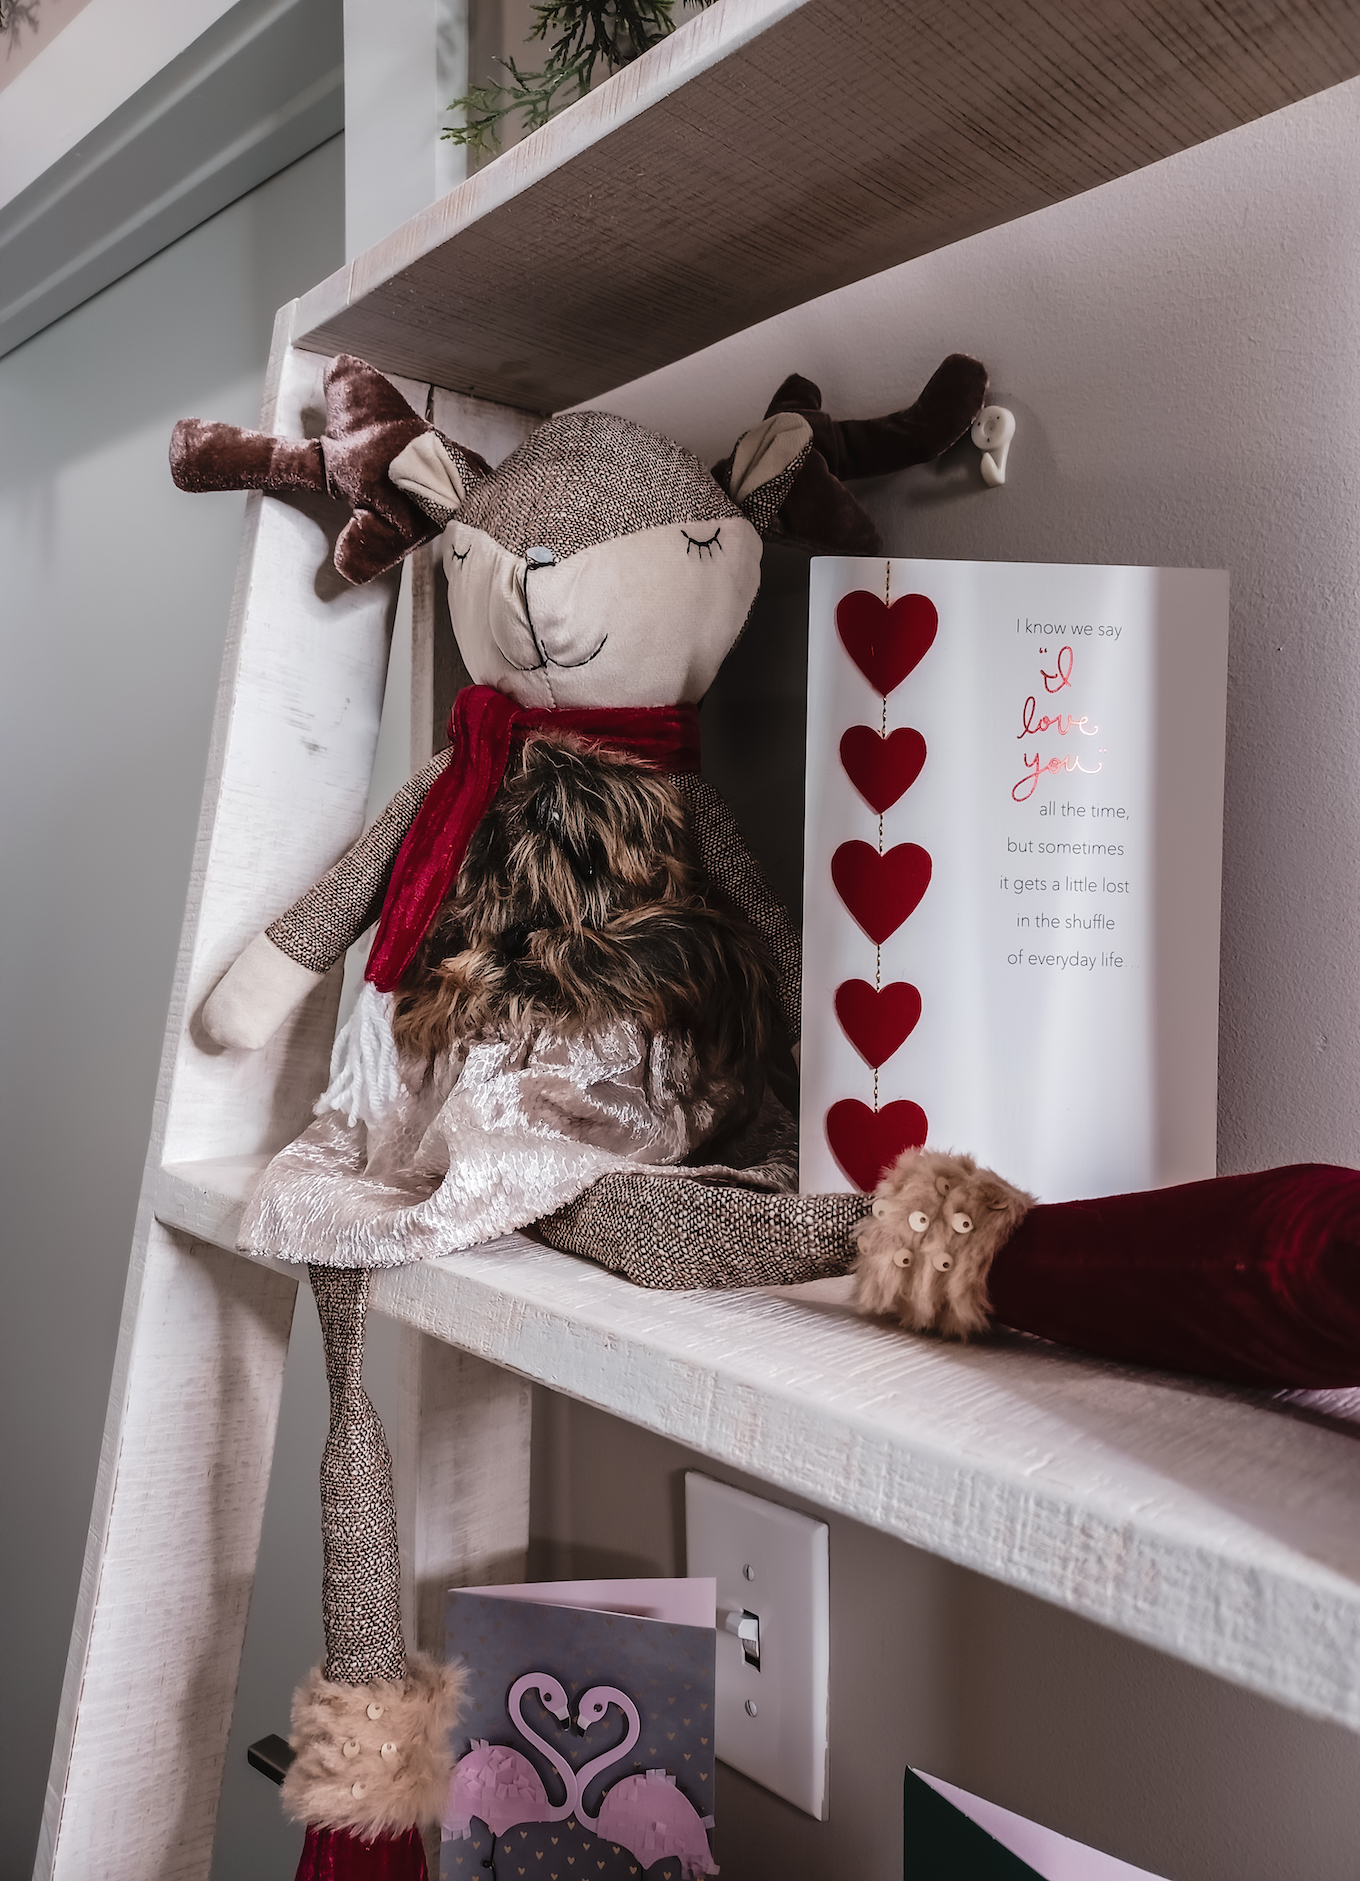 A smiling plush reindeer with a red scarf sits on a shelf